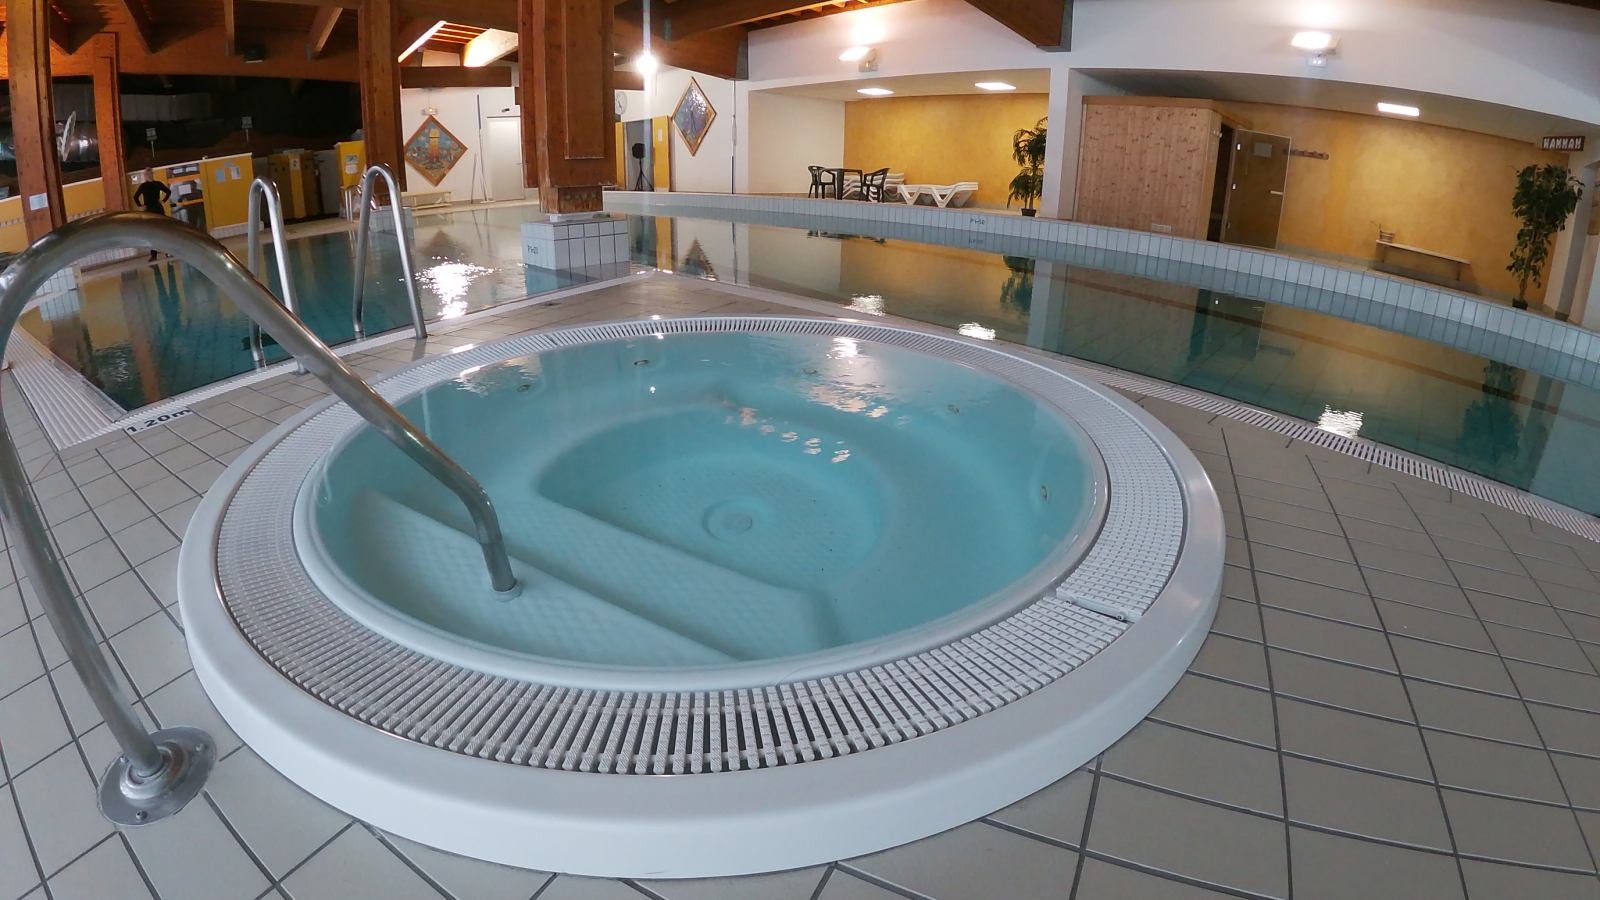 Jacuzzi at the Glières Leisure Park swimming pool in Val Cenis Lanslevillard